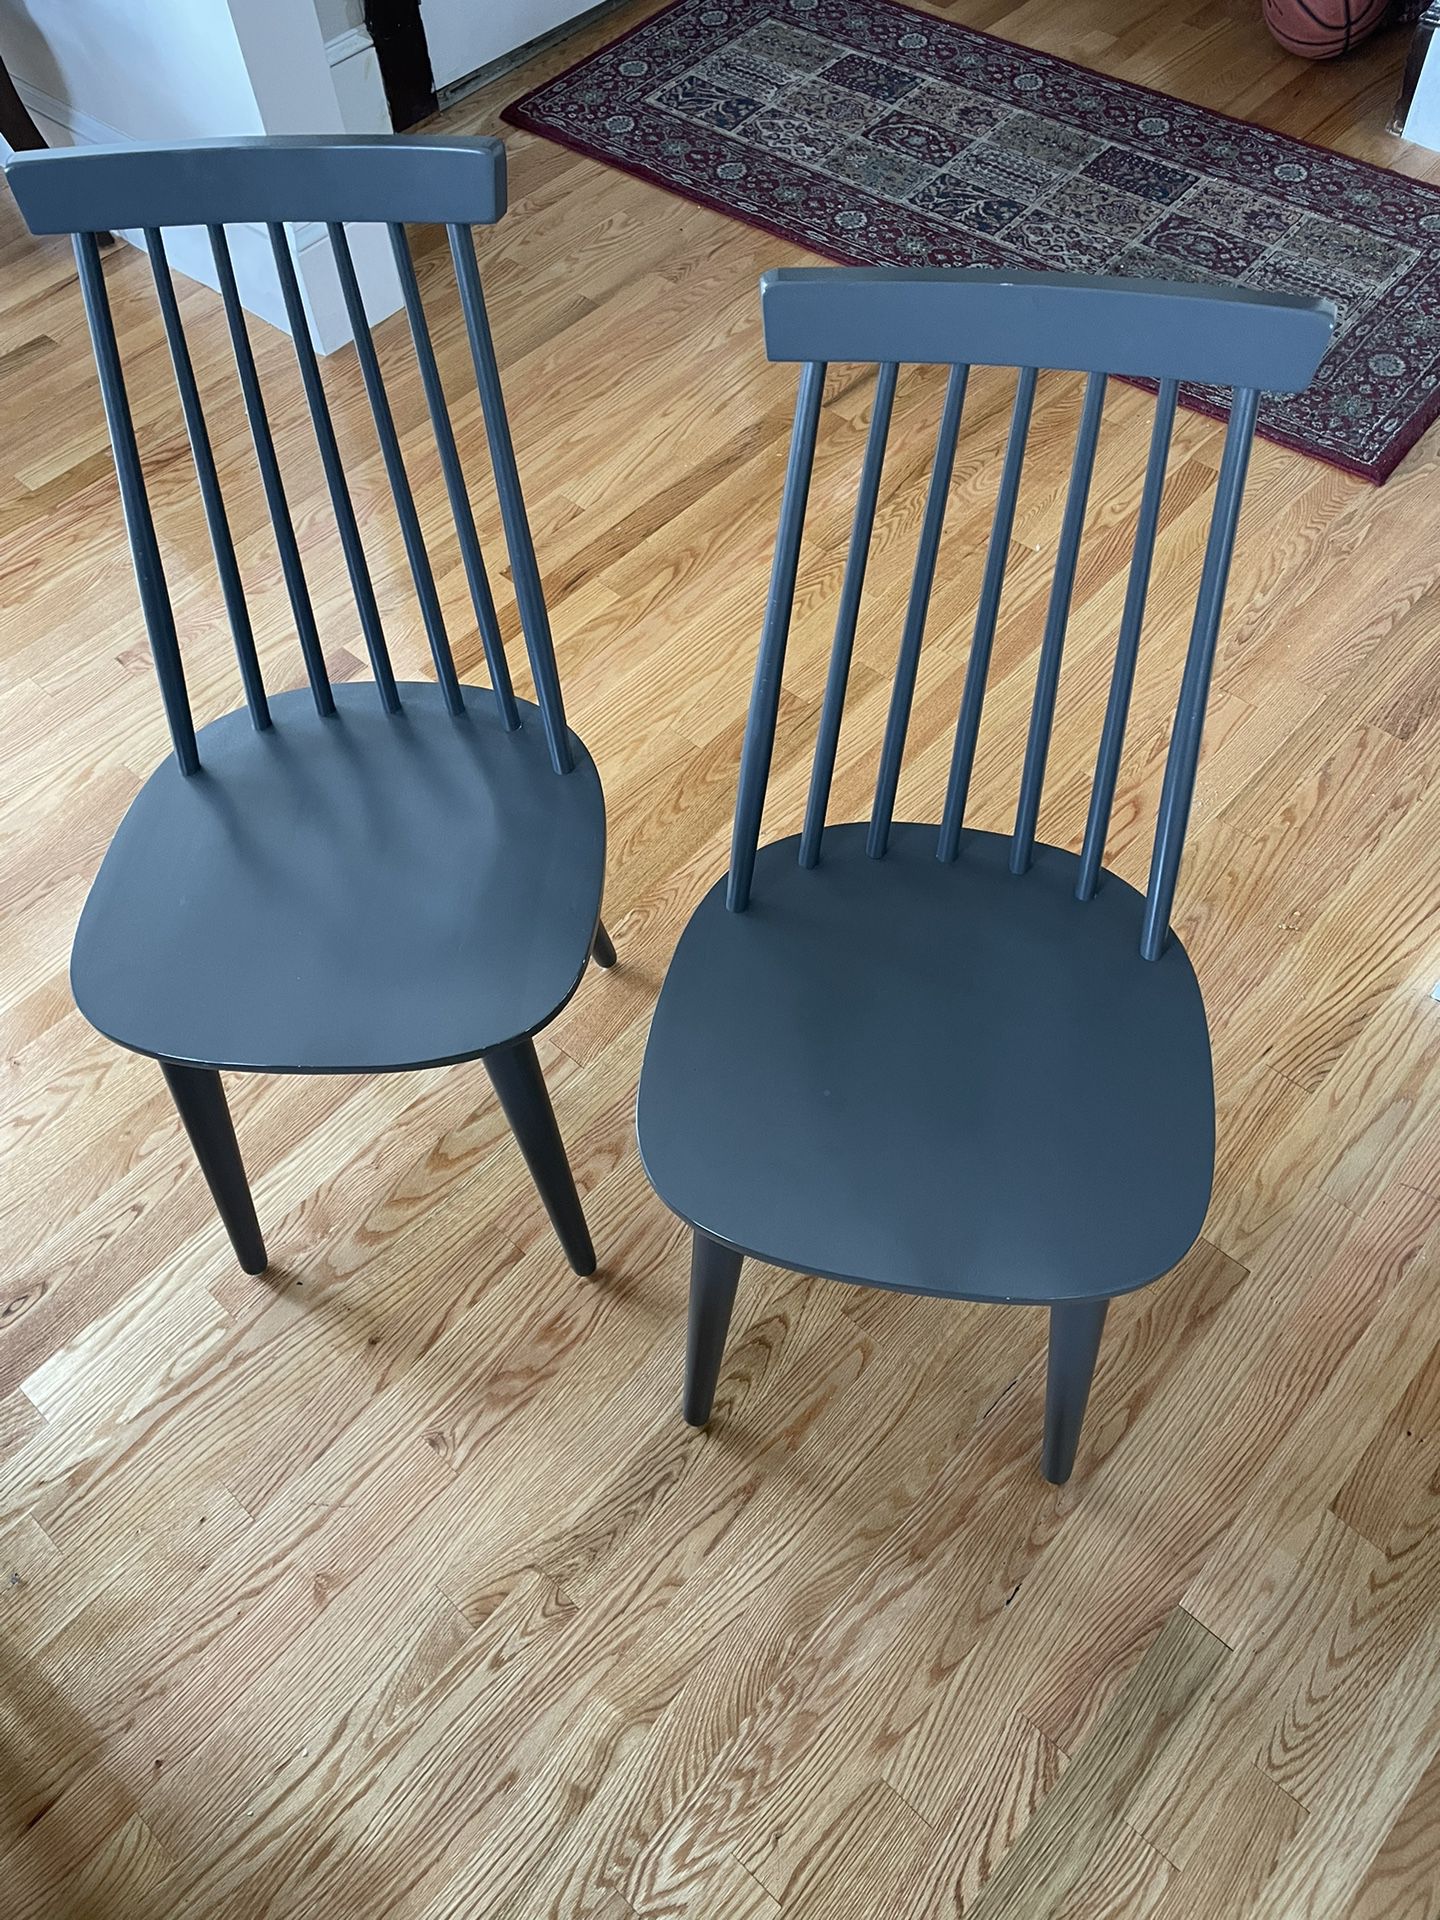 DUHOME Dining Chairs Set of 2 Wood Dining Room Chair